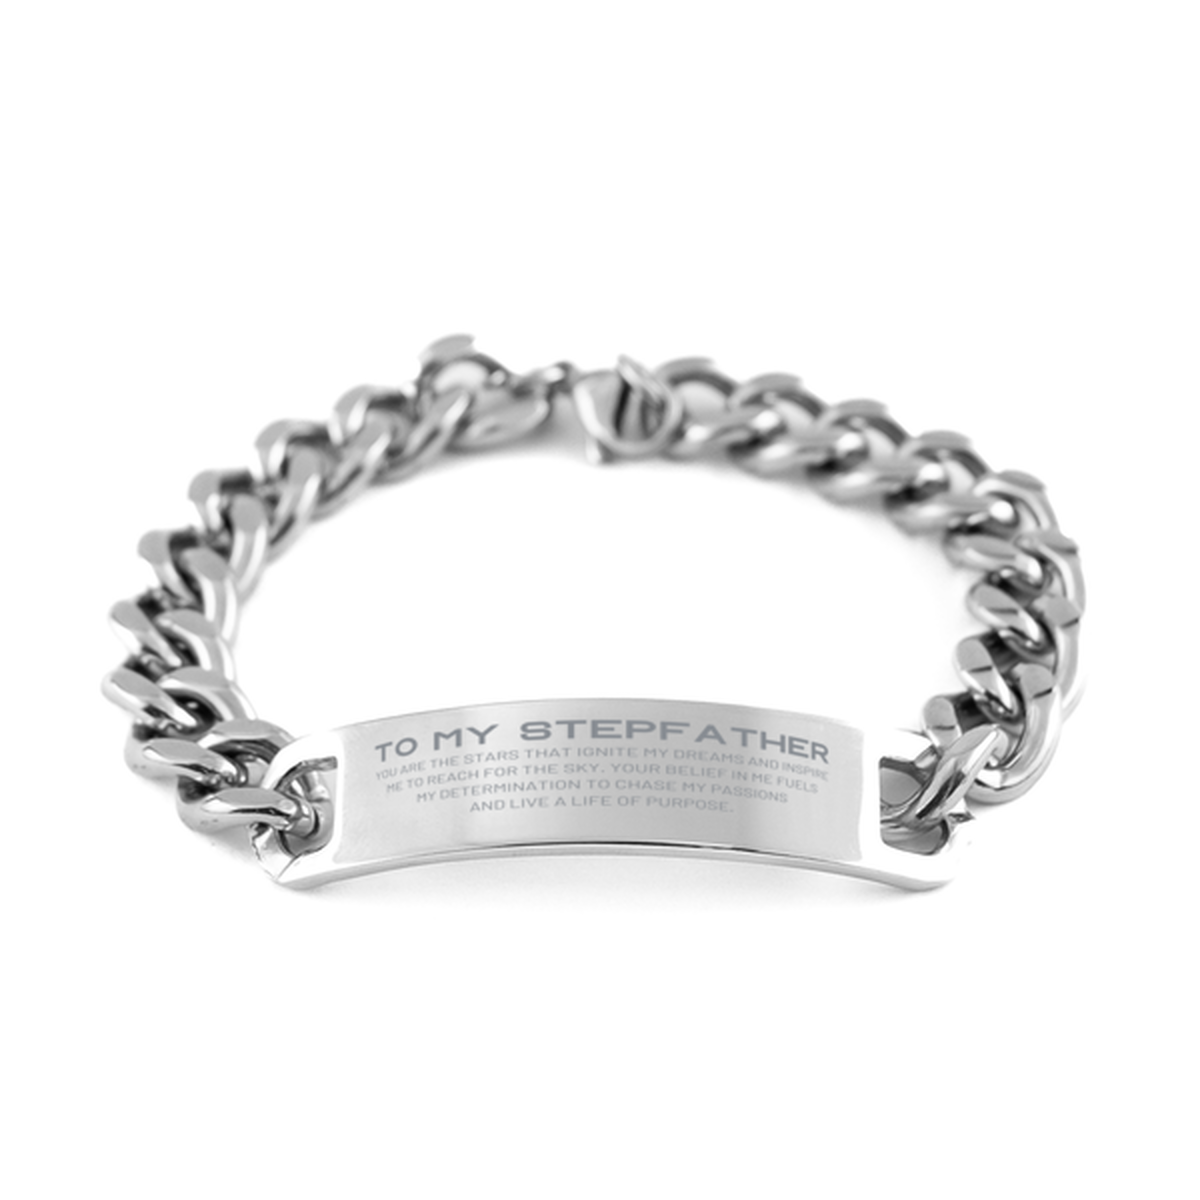 To My Stepfather Cuban Chain Stainless Steel Bracelet, You are the stars that ignite my dreams and inspire me to reach for the sky, Birthday Unique Gifts For Stepfather, Thank You Gifts For Stepfather